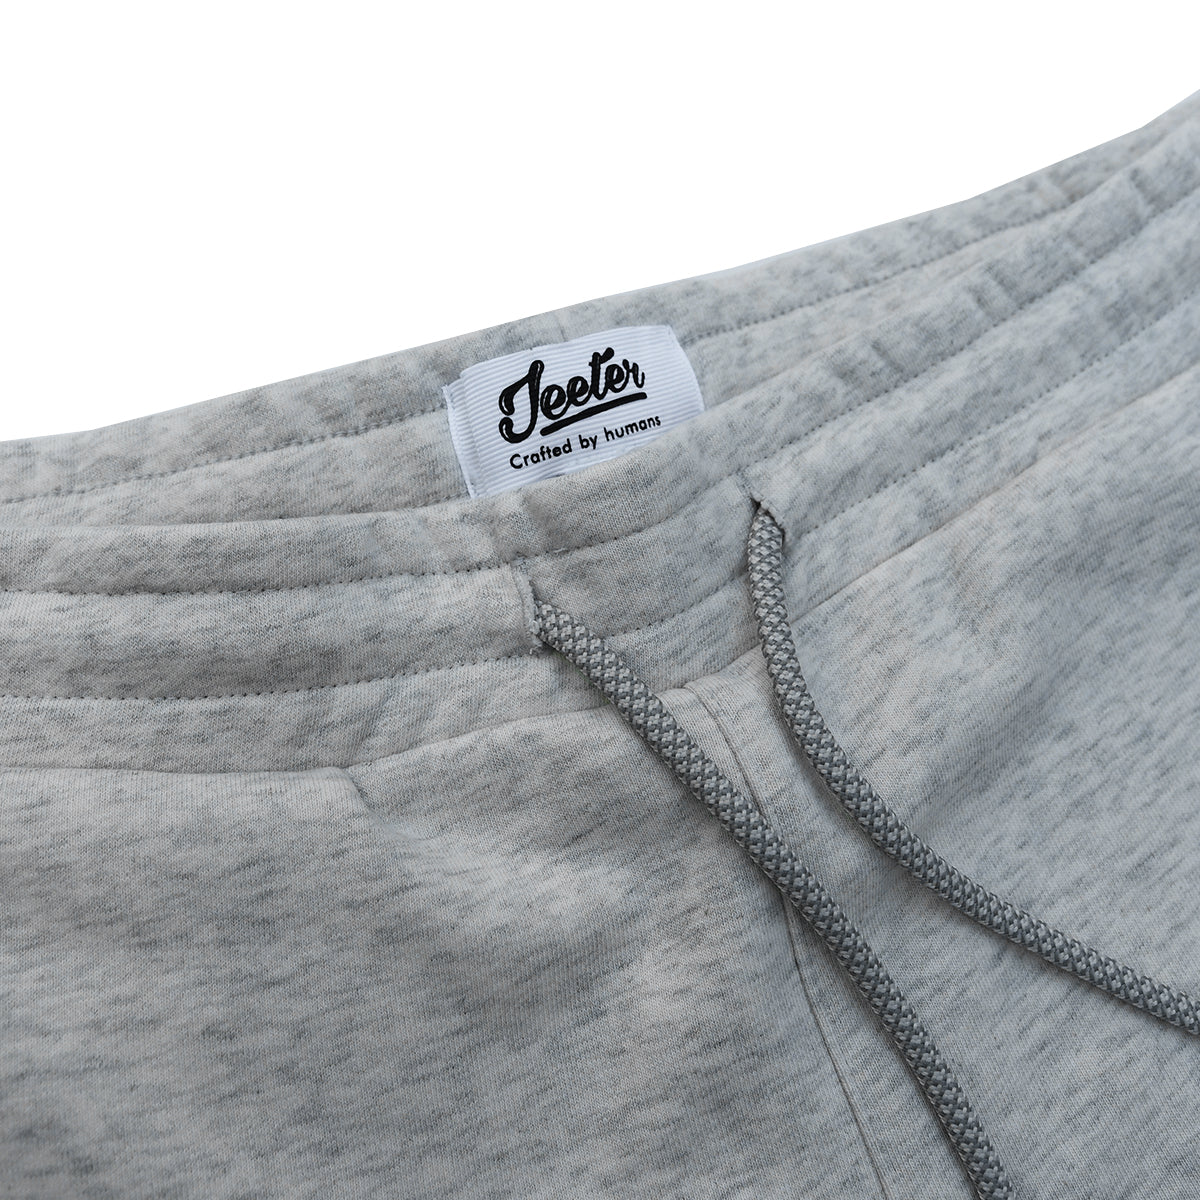 Heather Grey Jeeter Lux Shorts